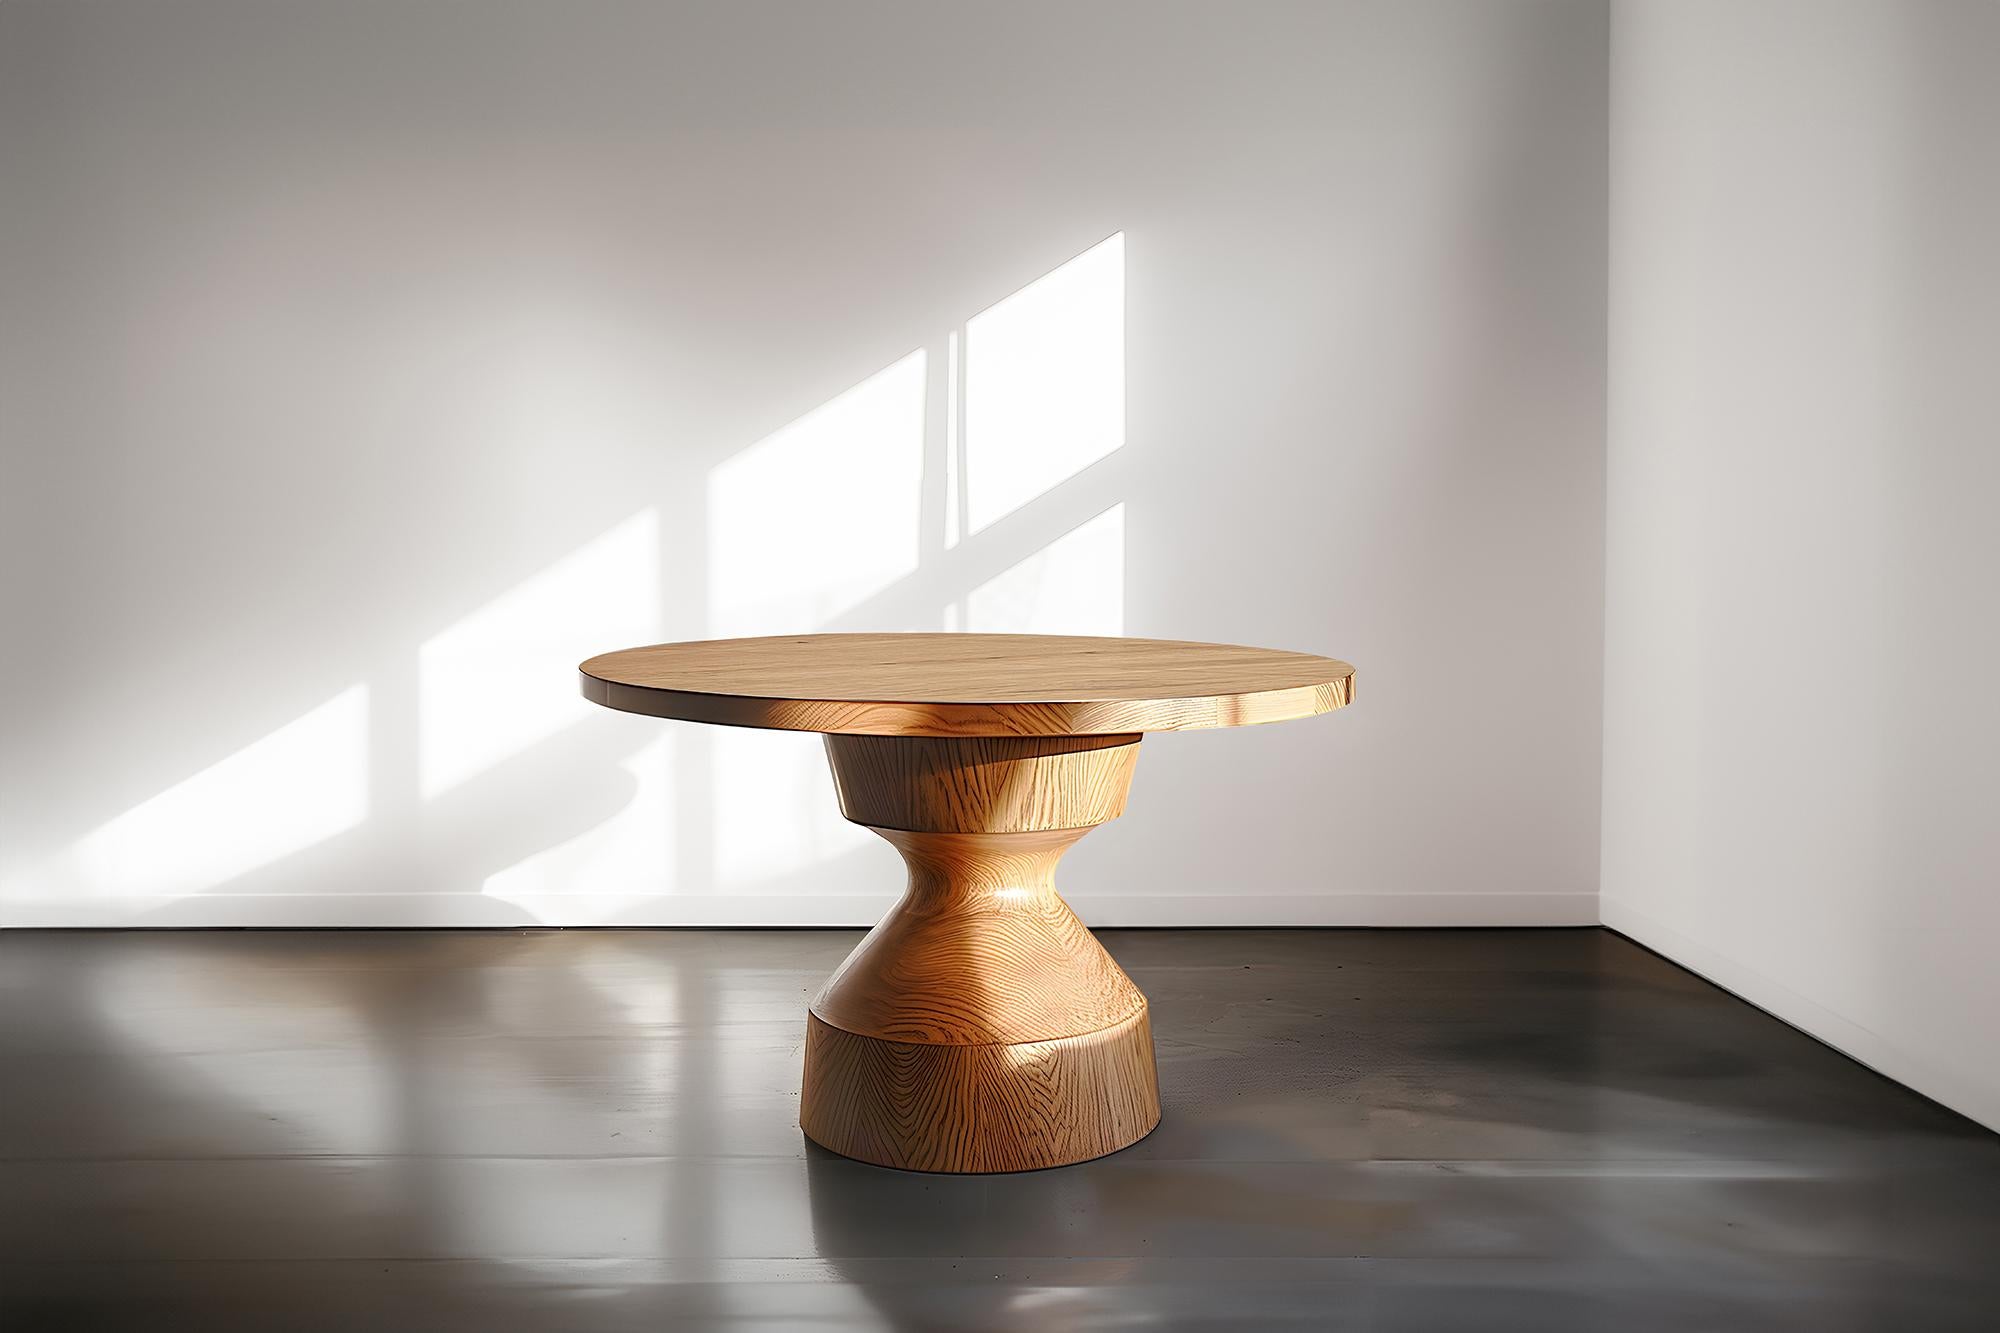 Socle by Joel Escalona, Conference Tables, Design Meets Function No19

——

Introducing the 